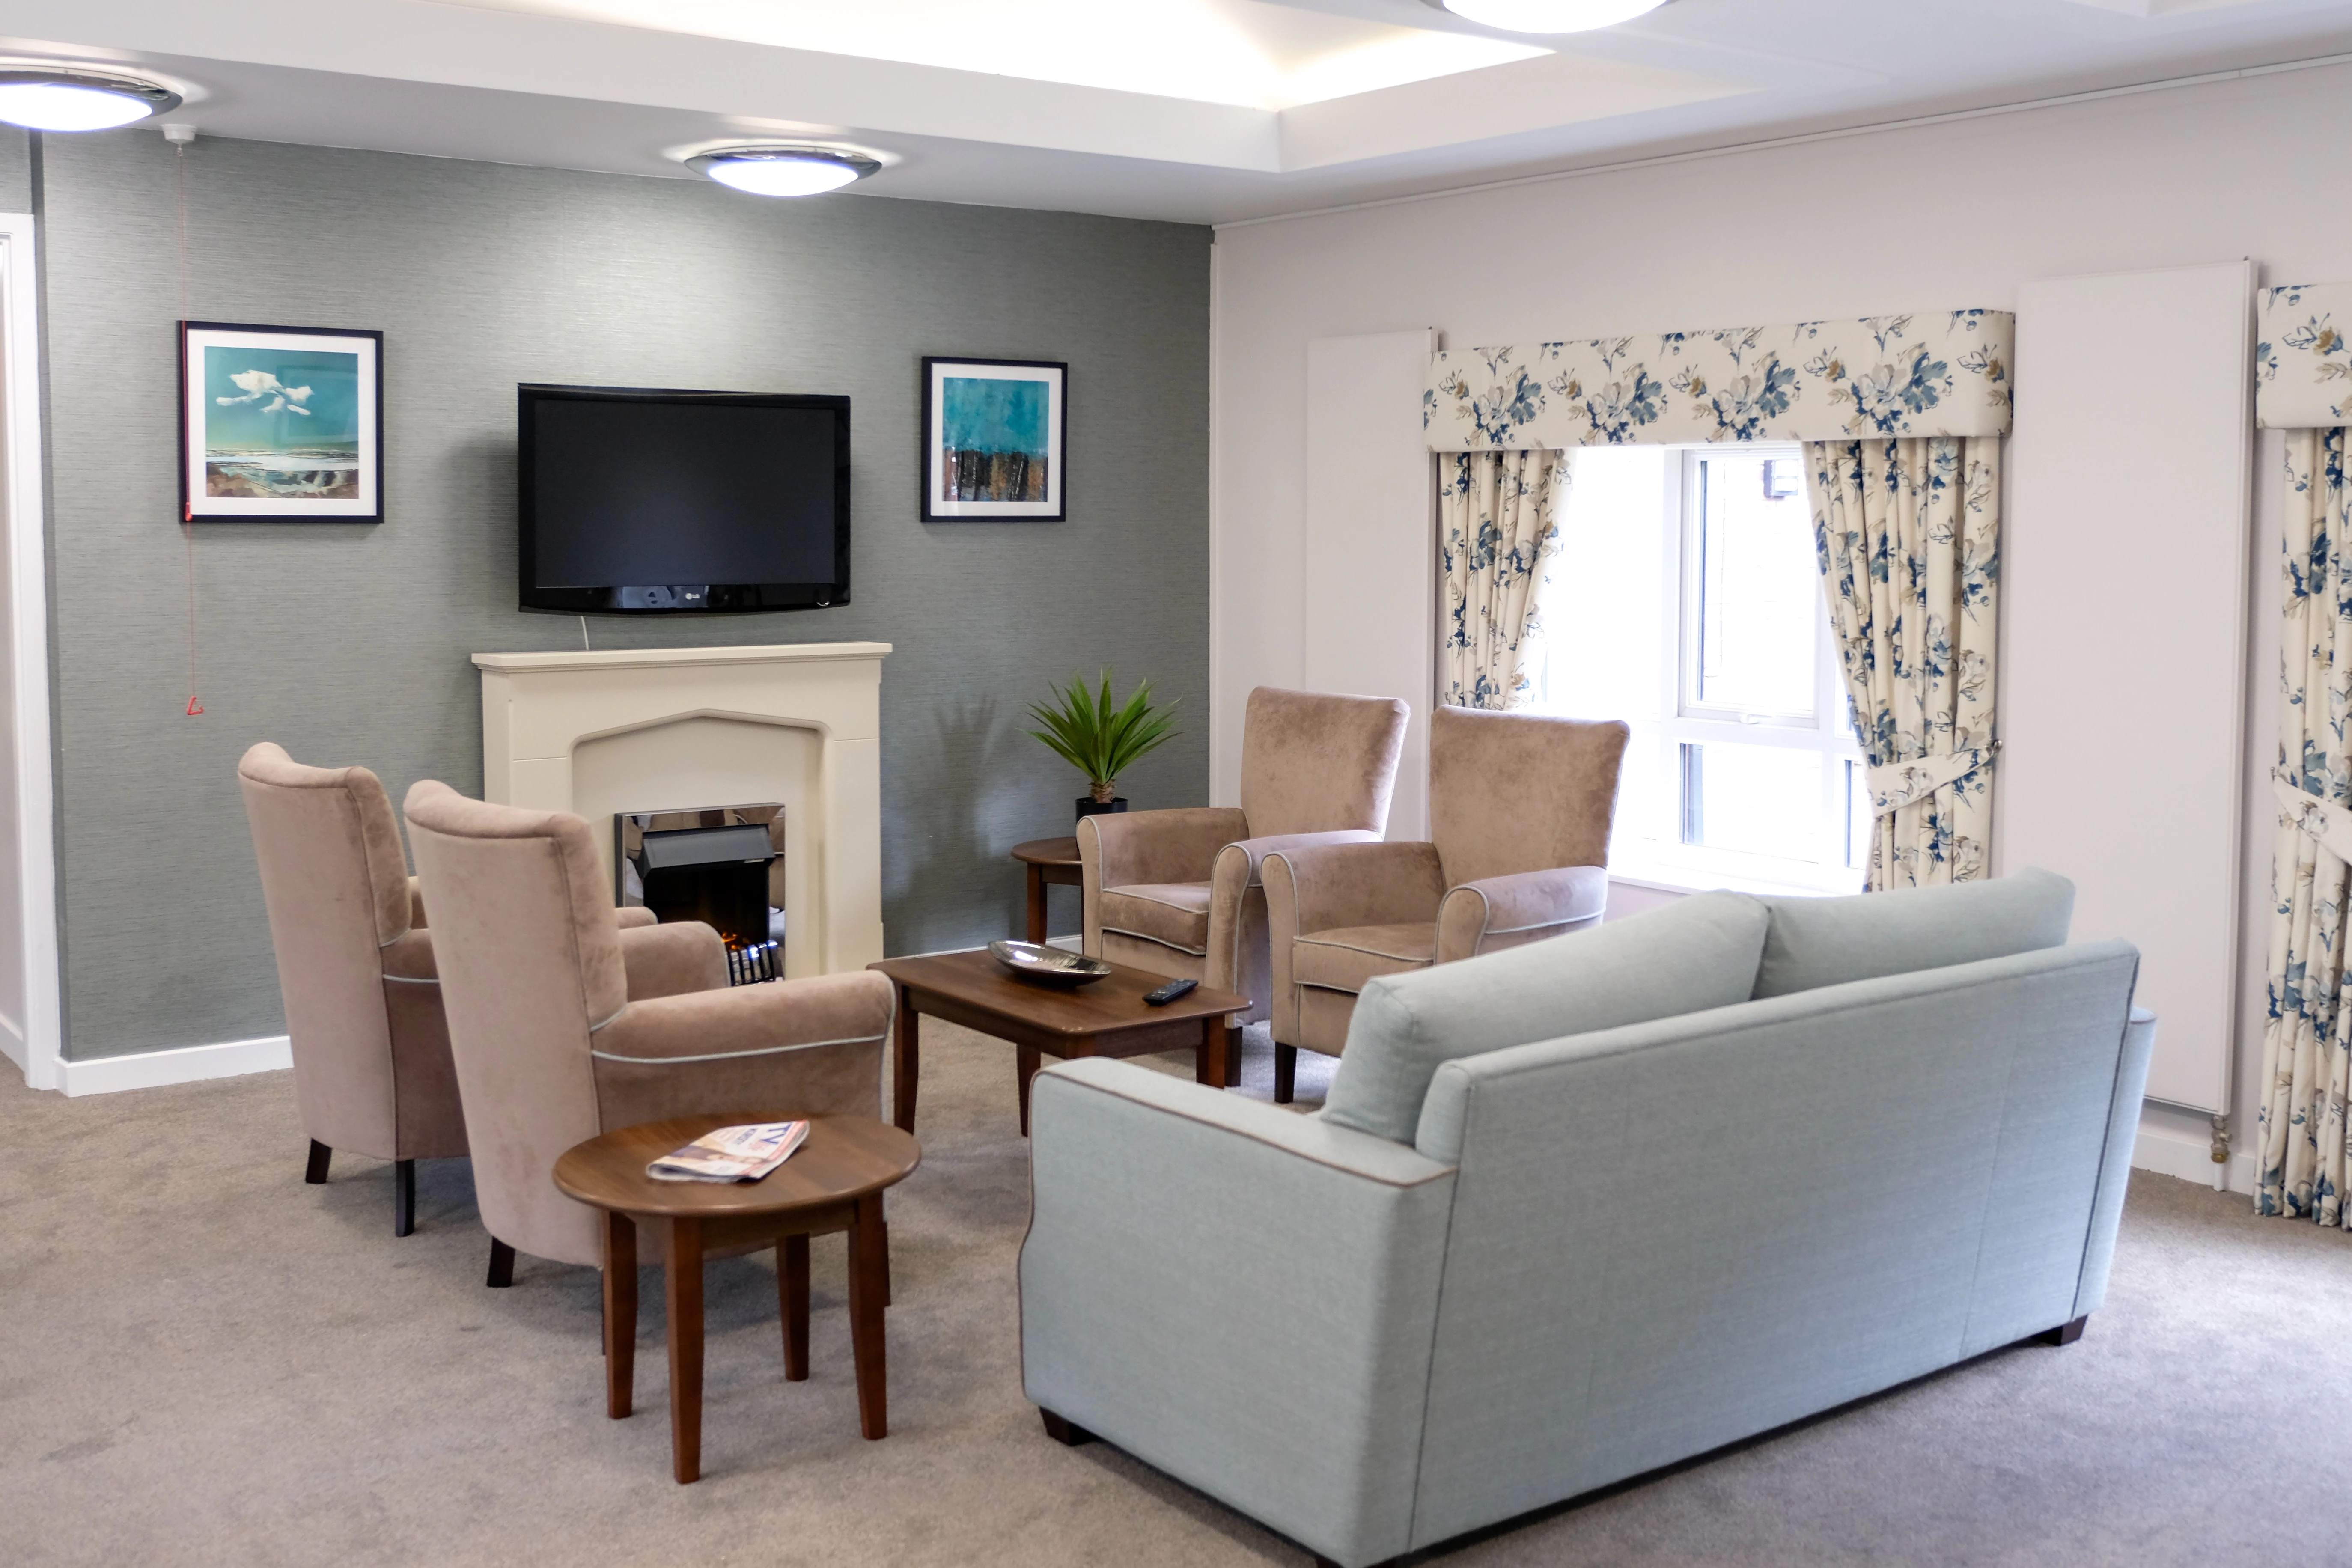 The refurbished communal lounge area at Mill Spring Court